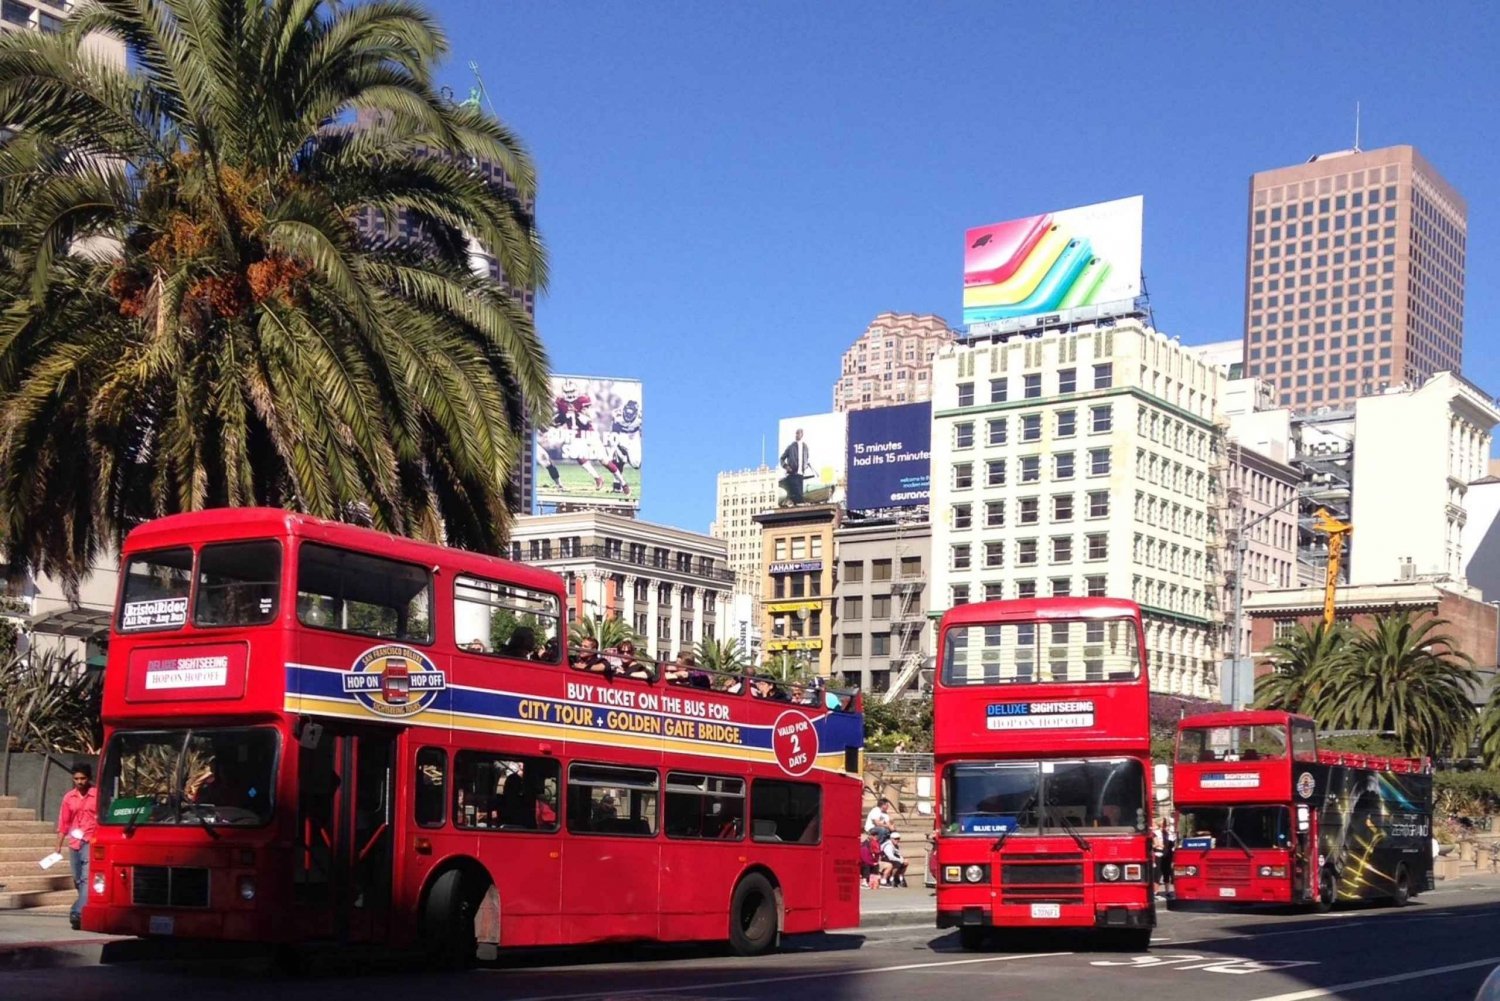 San Francisco: Hop-On Hop-Off Deluxe Bus Tour with 20 Stops